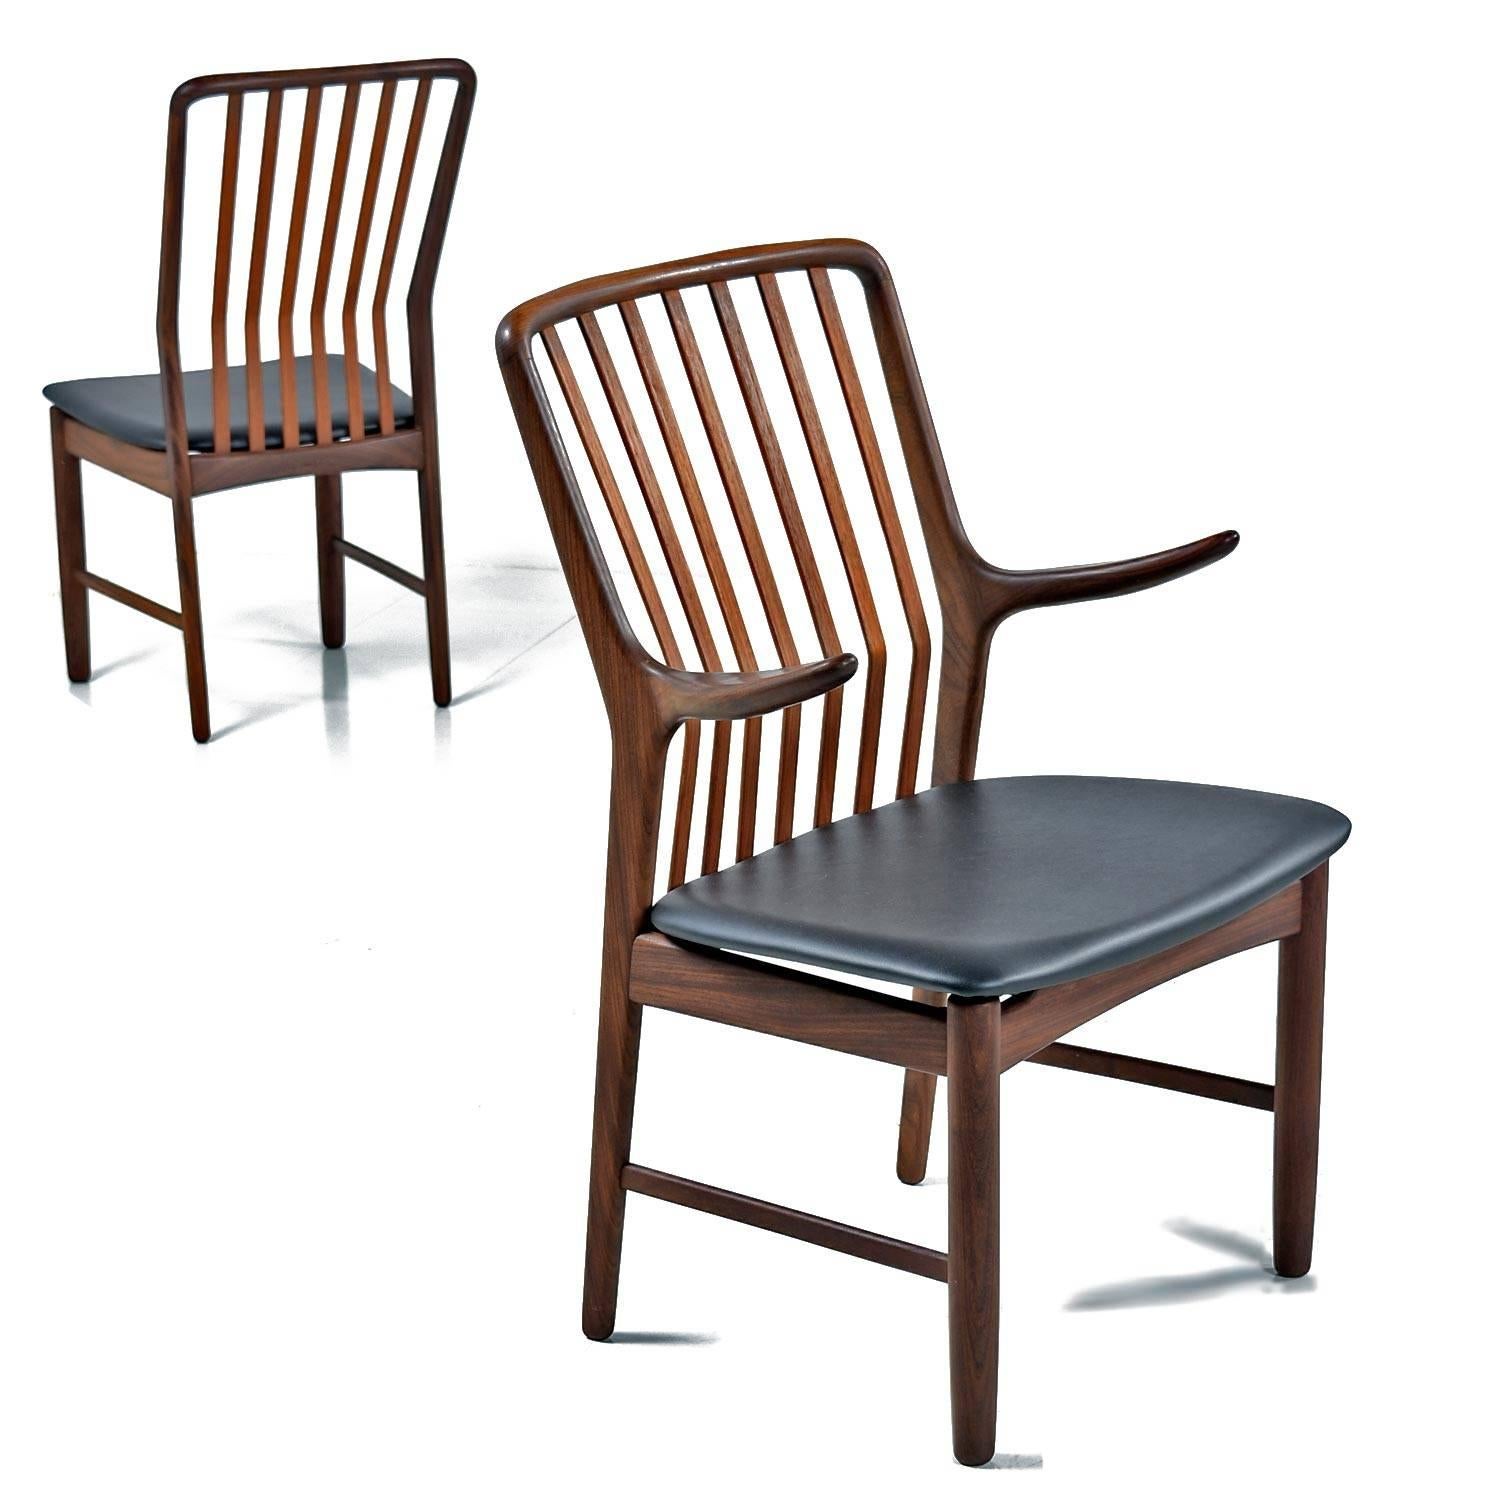 Not only is this a set of (six), but it includes (two) of the sought after arm chairs. The width of these captain chairs is very accommodating which isn't particularly common, they are comfortably roomy. The floating arms paired with the slightly